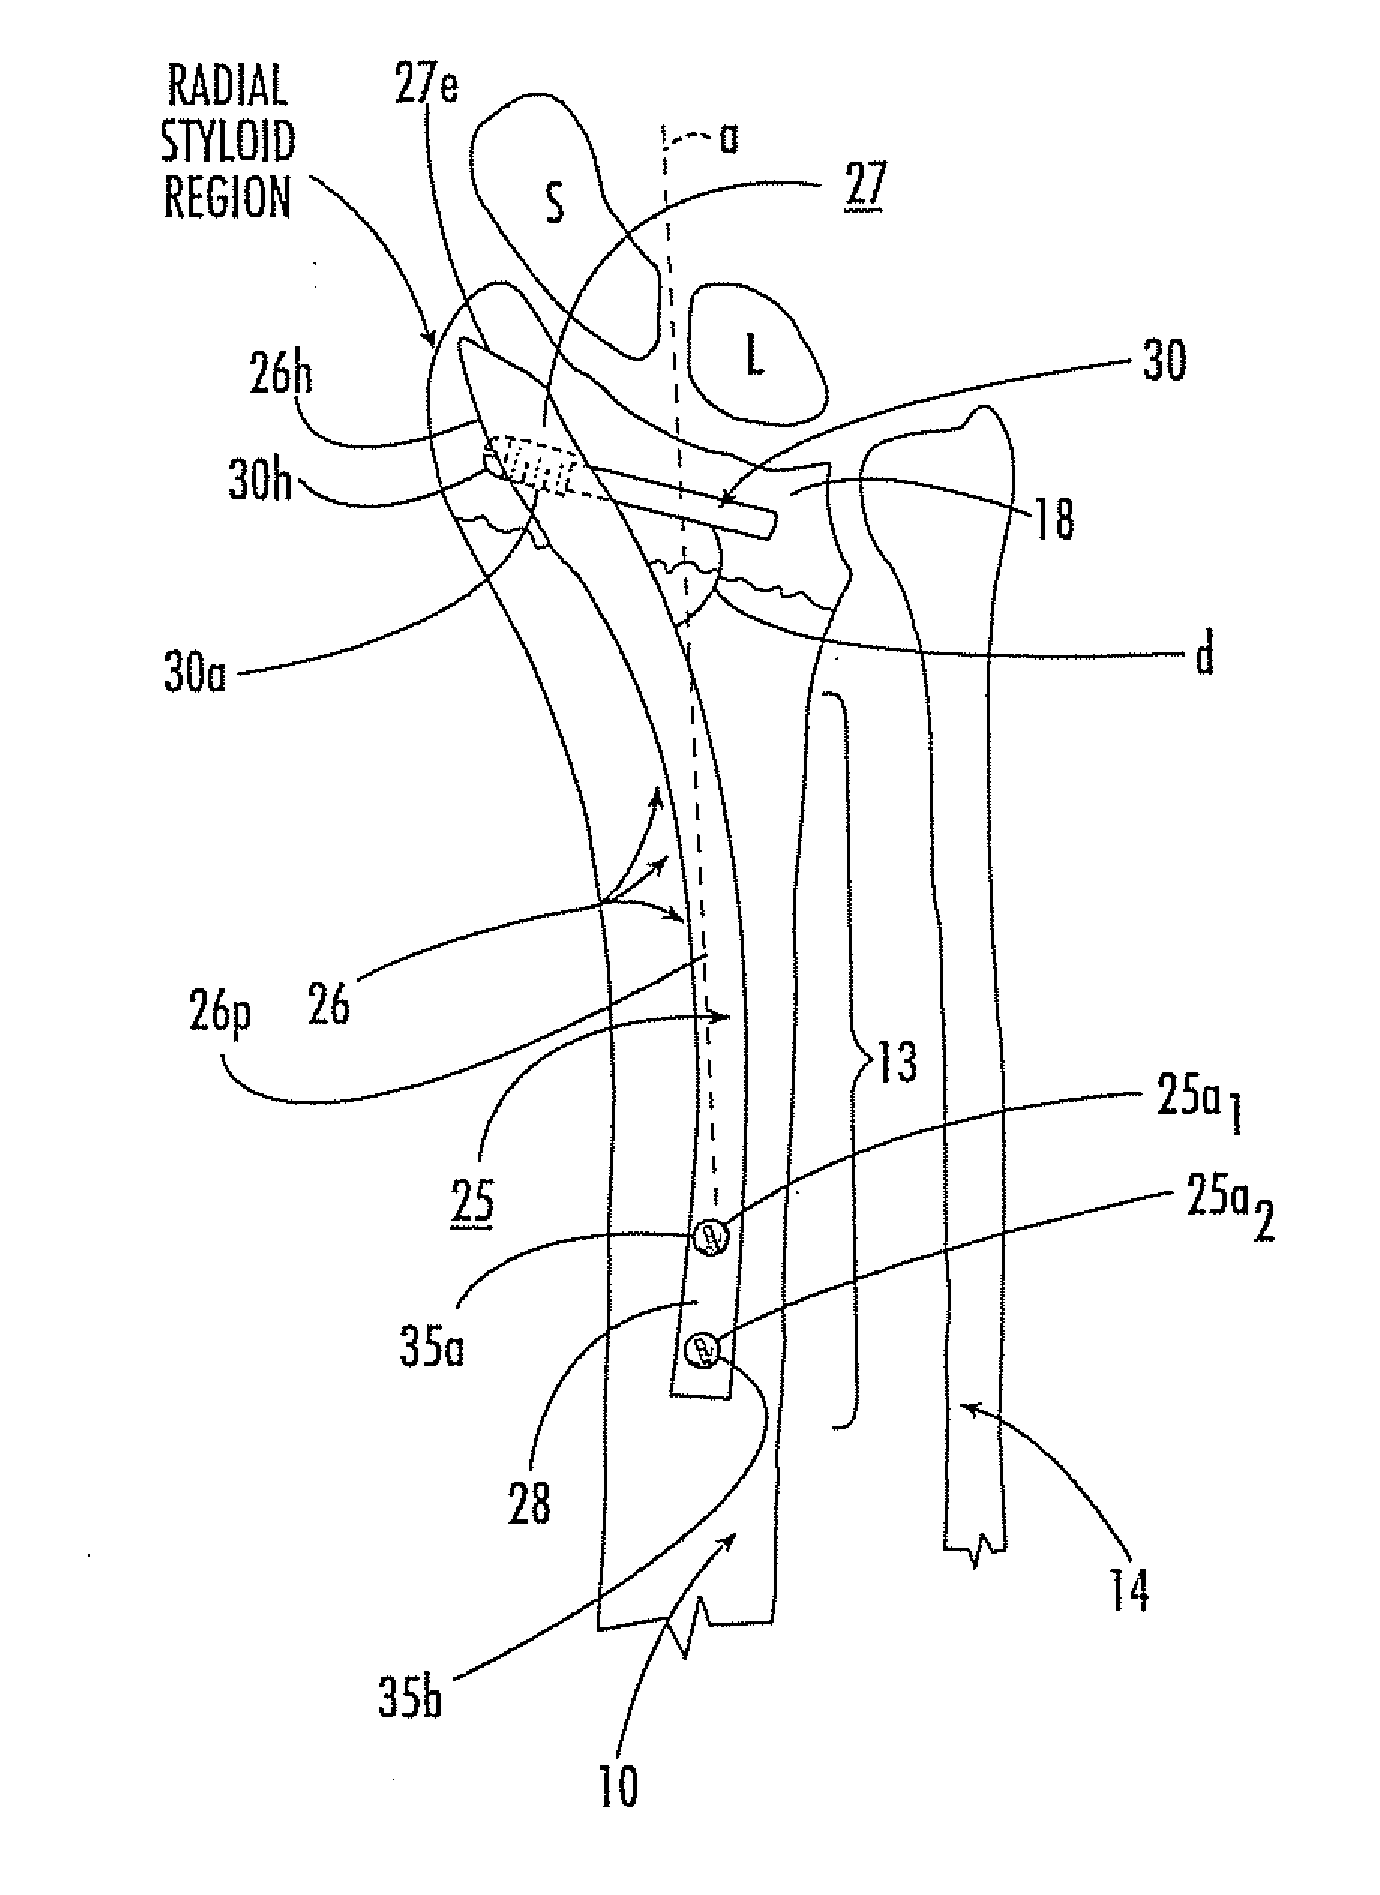 Kits with intramedullary interlocking fixation devices for the distal radius